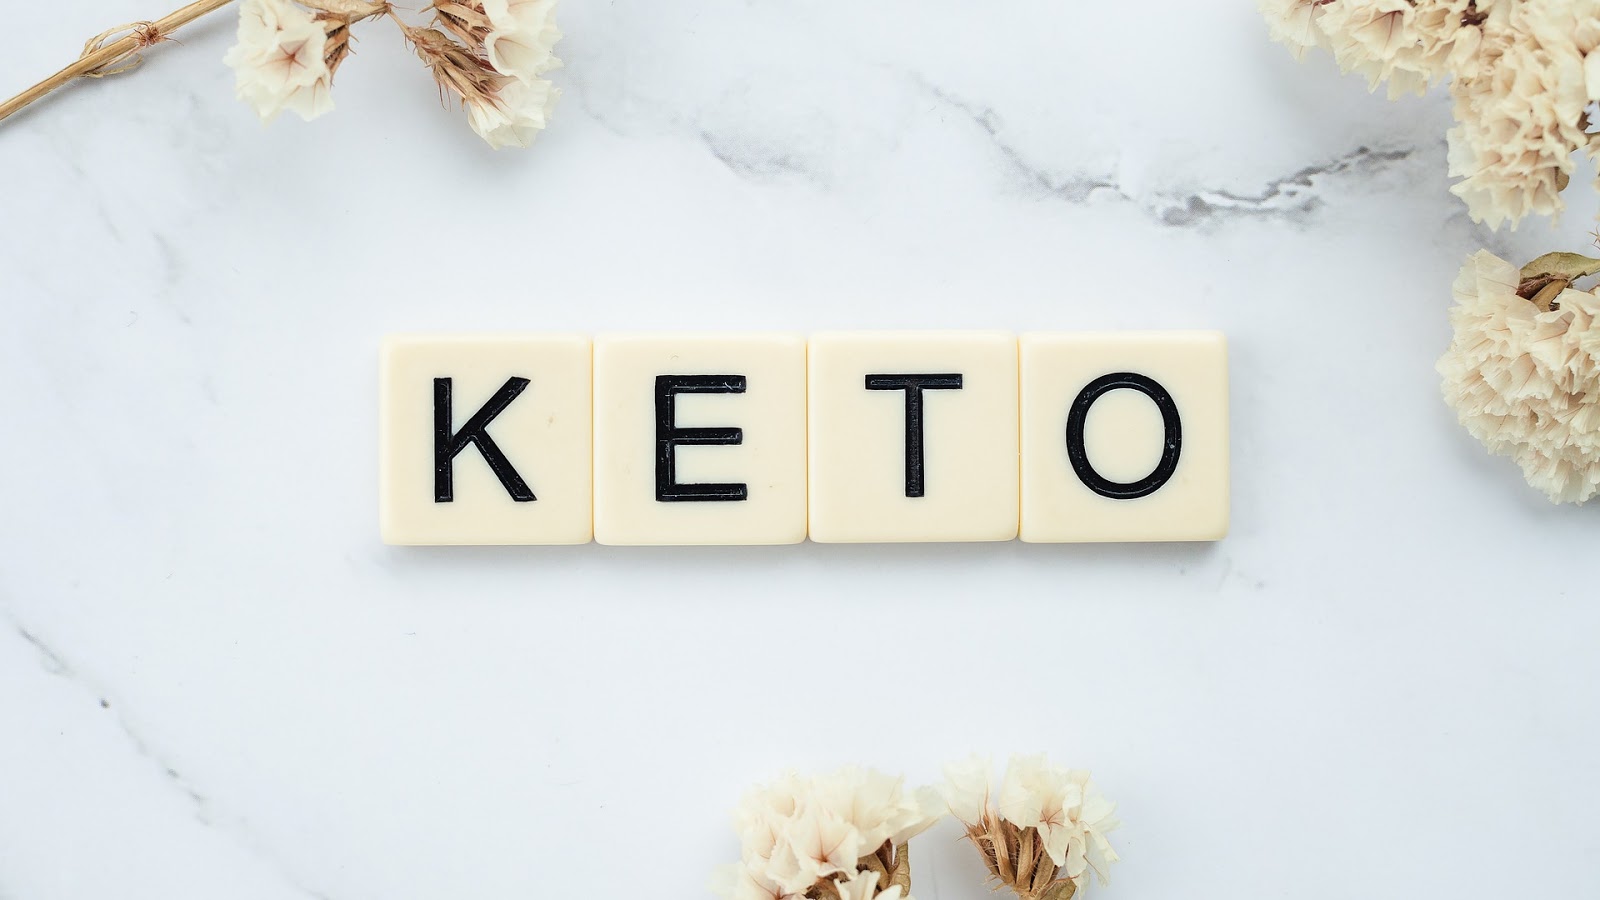 The Keto Diet: Should You or Shouldn’t You?